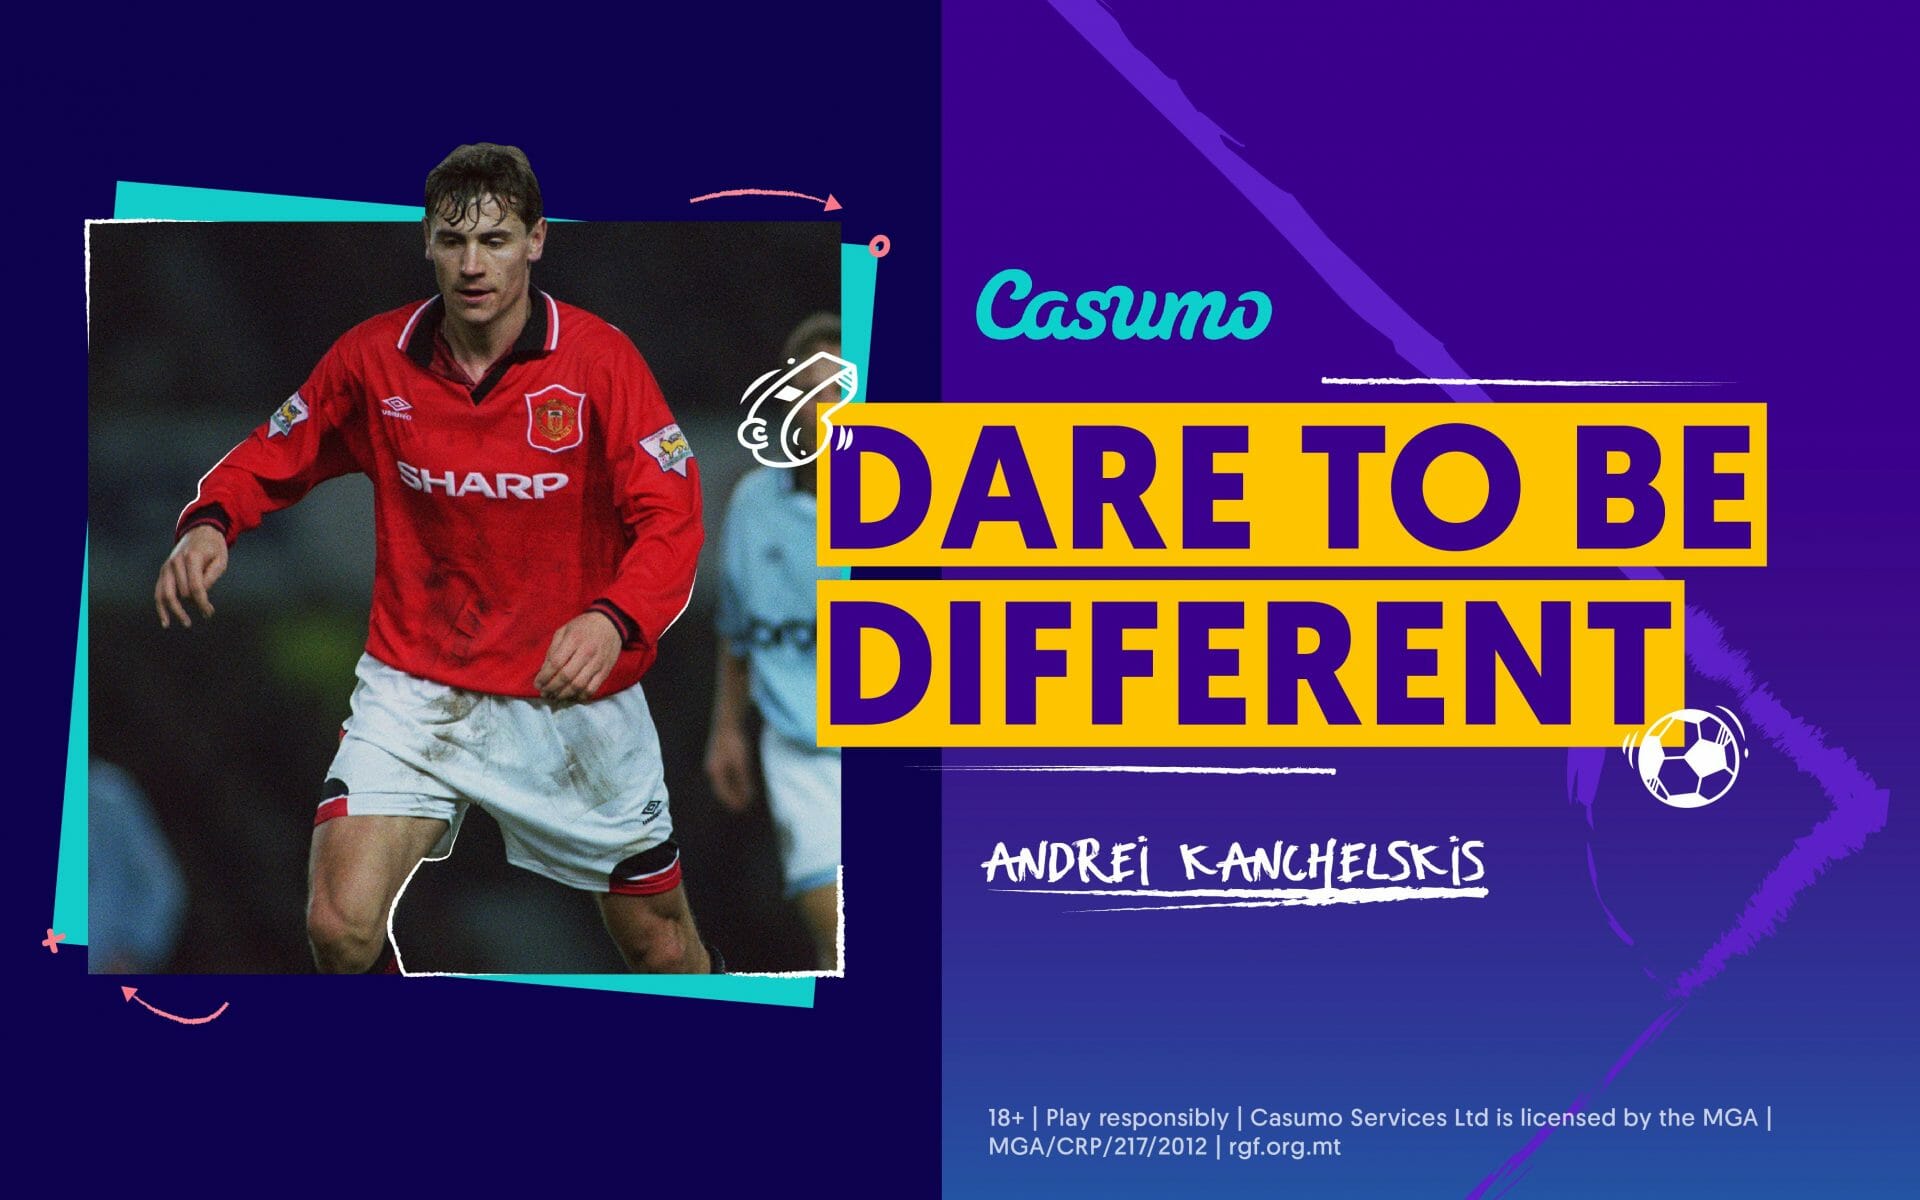 Dare To Be Different with Andrei Kanchelskis